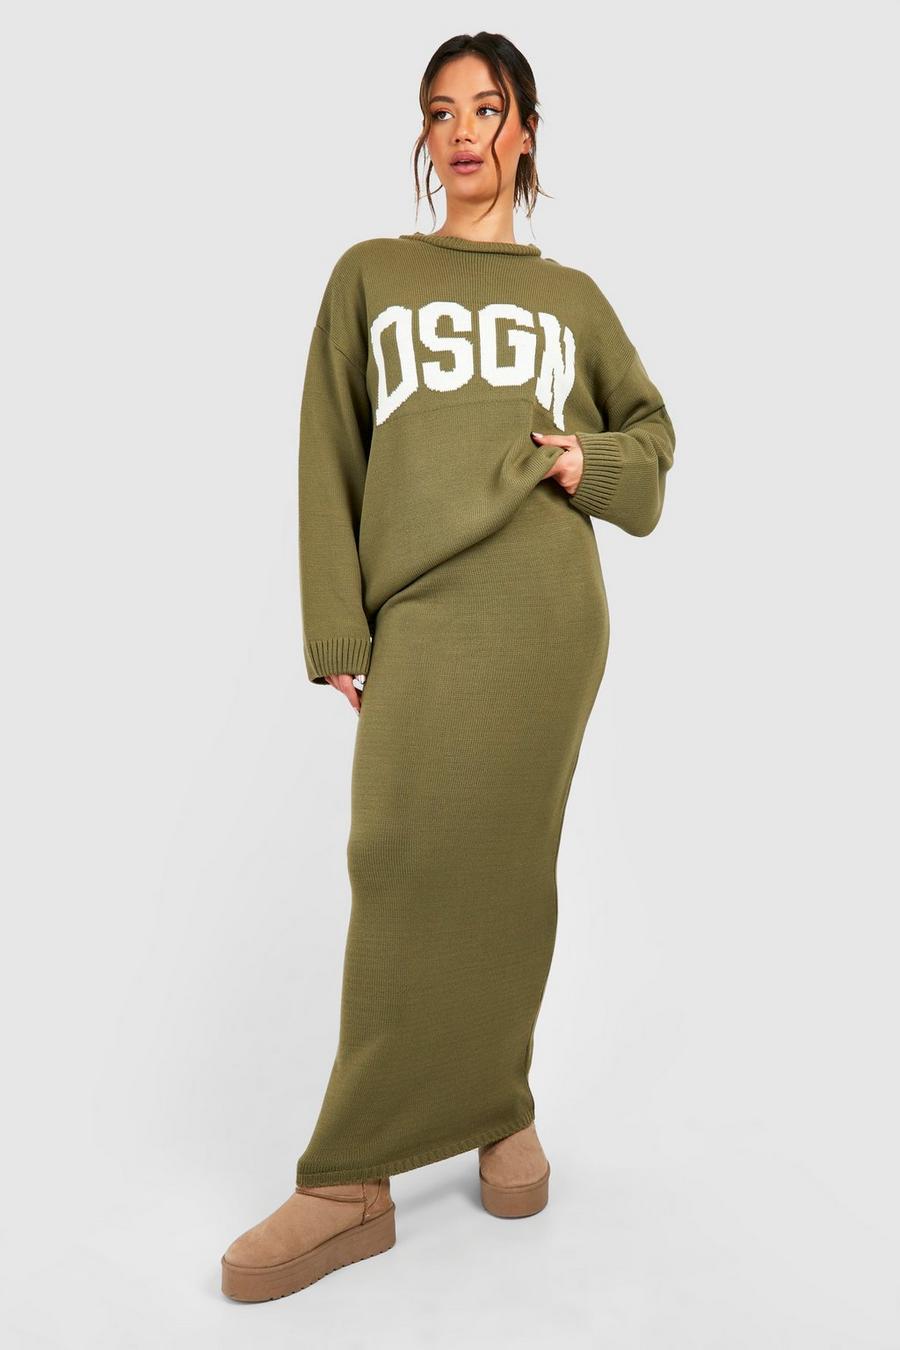 Khaki Dsgn Crew Neck Knitted Sweater And Maxi Skirt Set